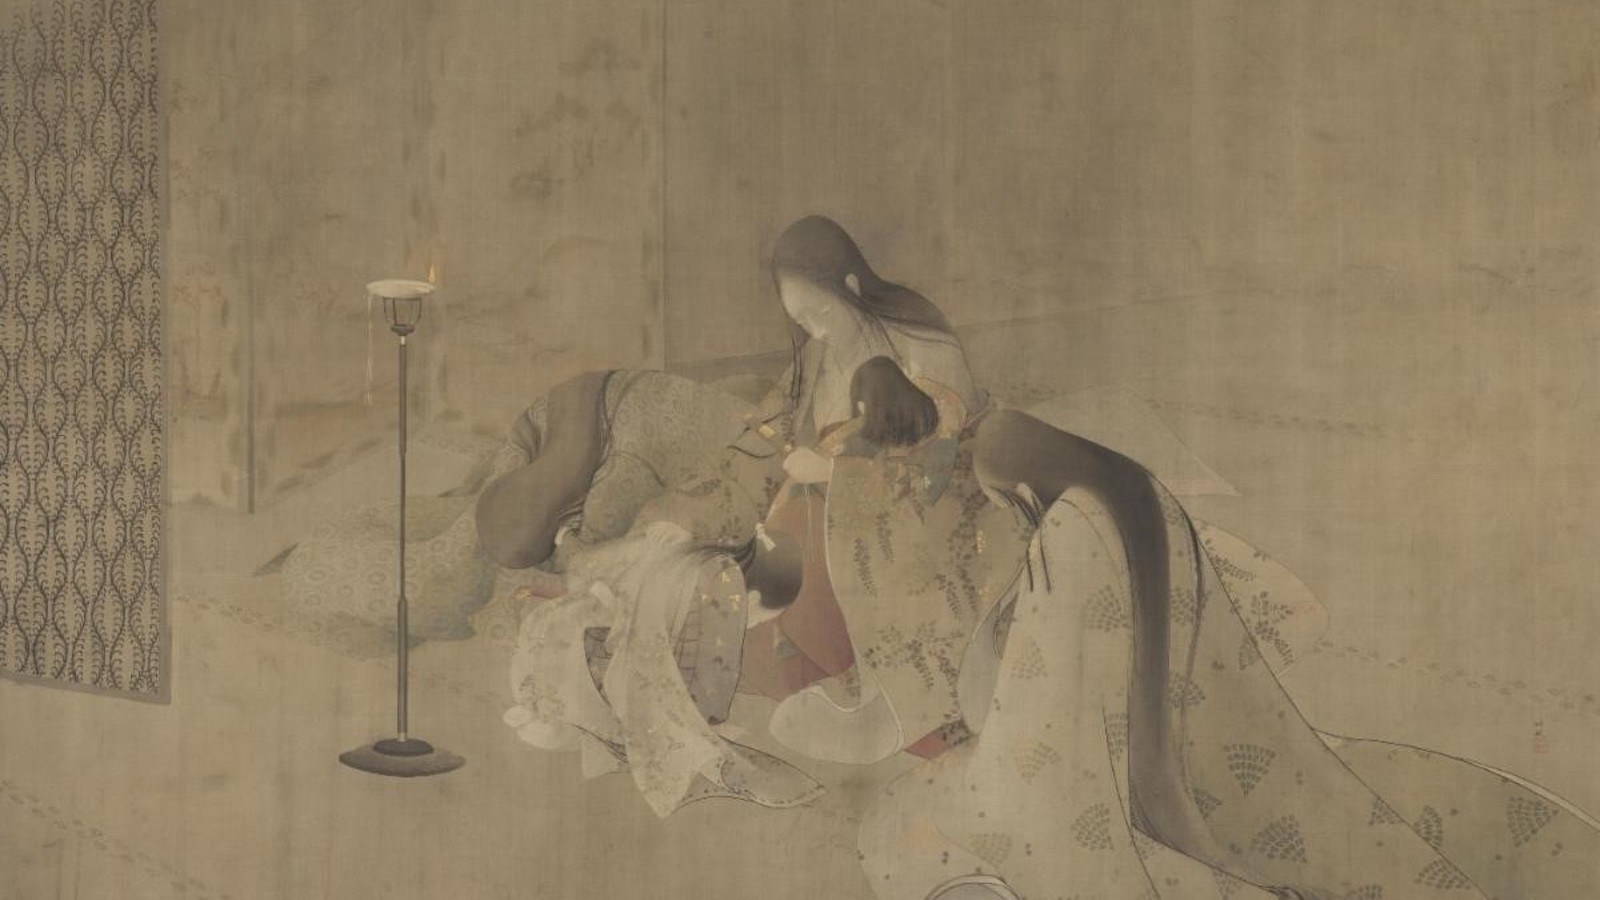 JASA Annual Meeting and Lecture:<br /><span style="font-size: 1.2rem;">Highlights of Japanese Art from the Philadelphia Museum of Art</span>